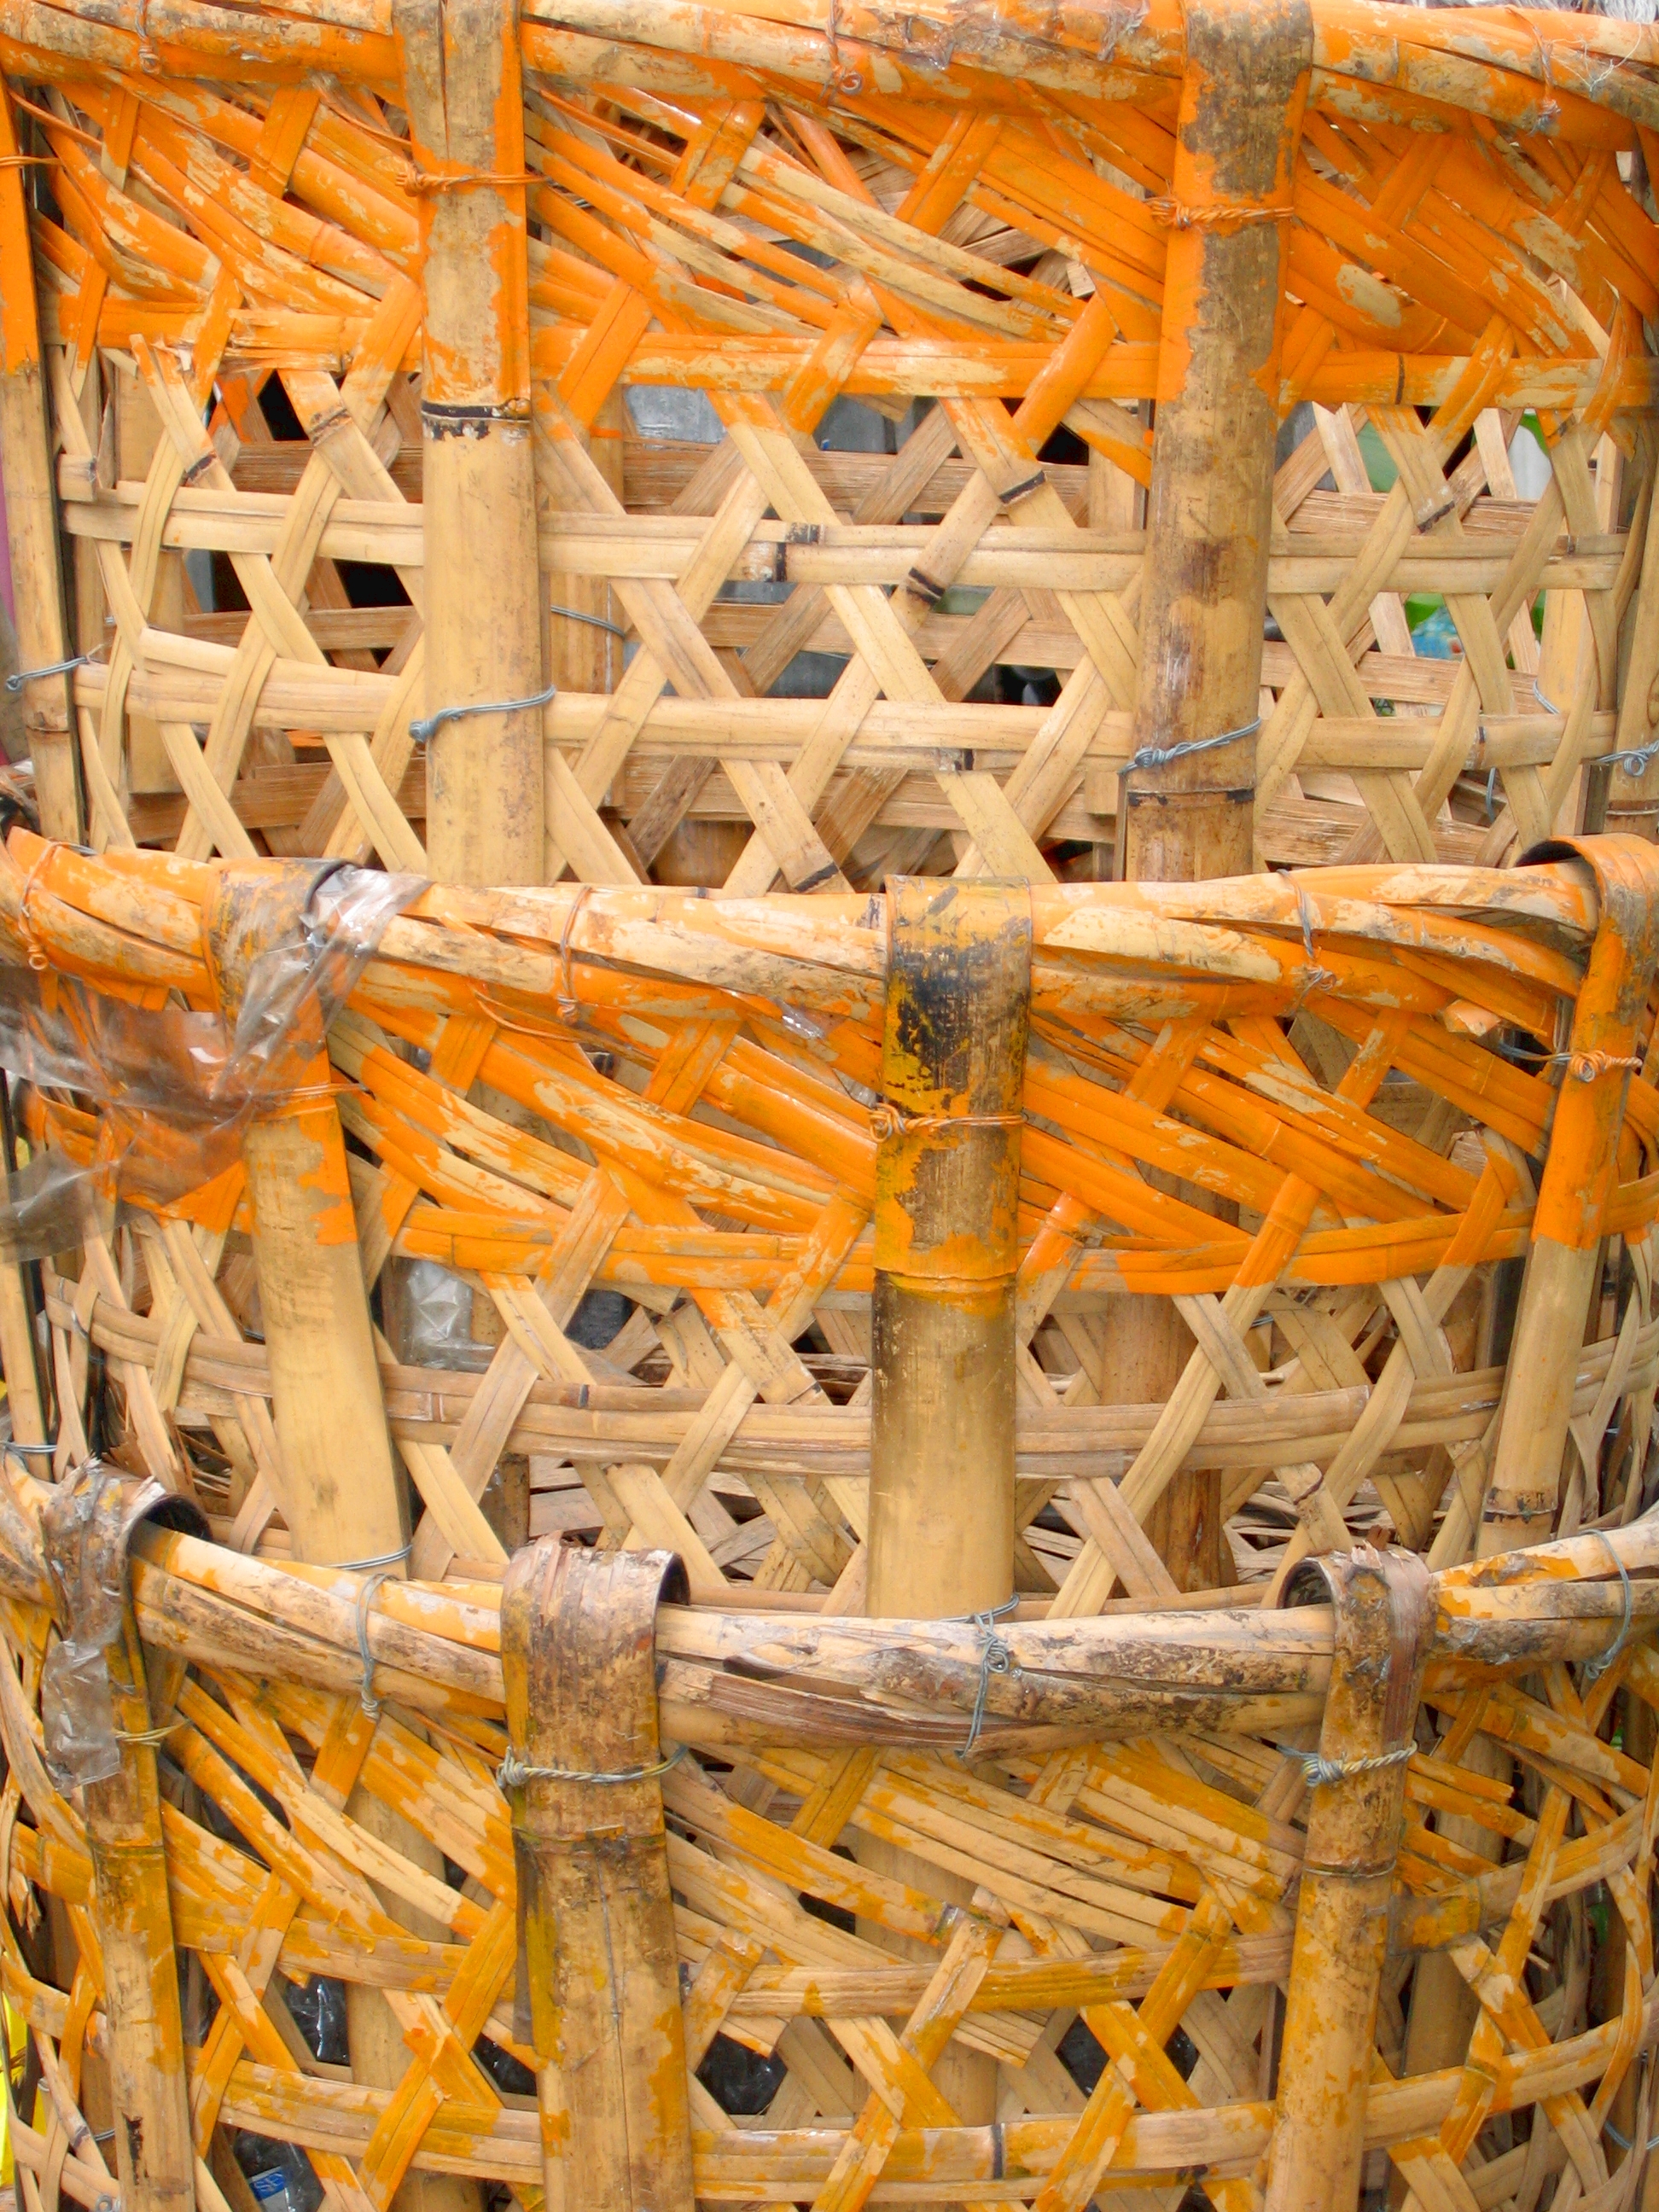 Bamboo Basket, Bamboo, Baskets, Container, Crisscross, HQ Photo